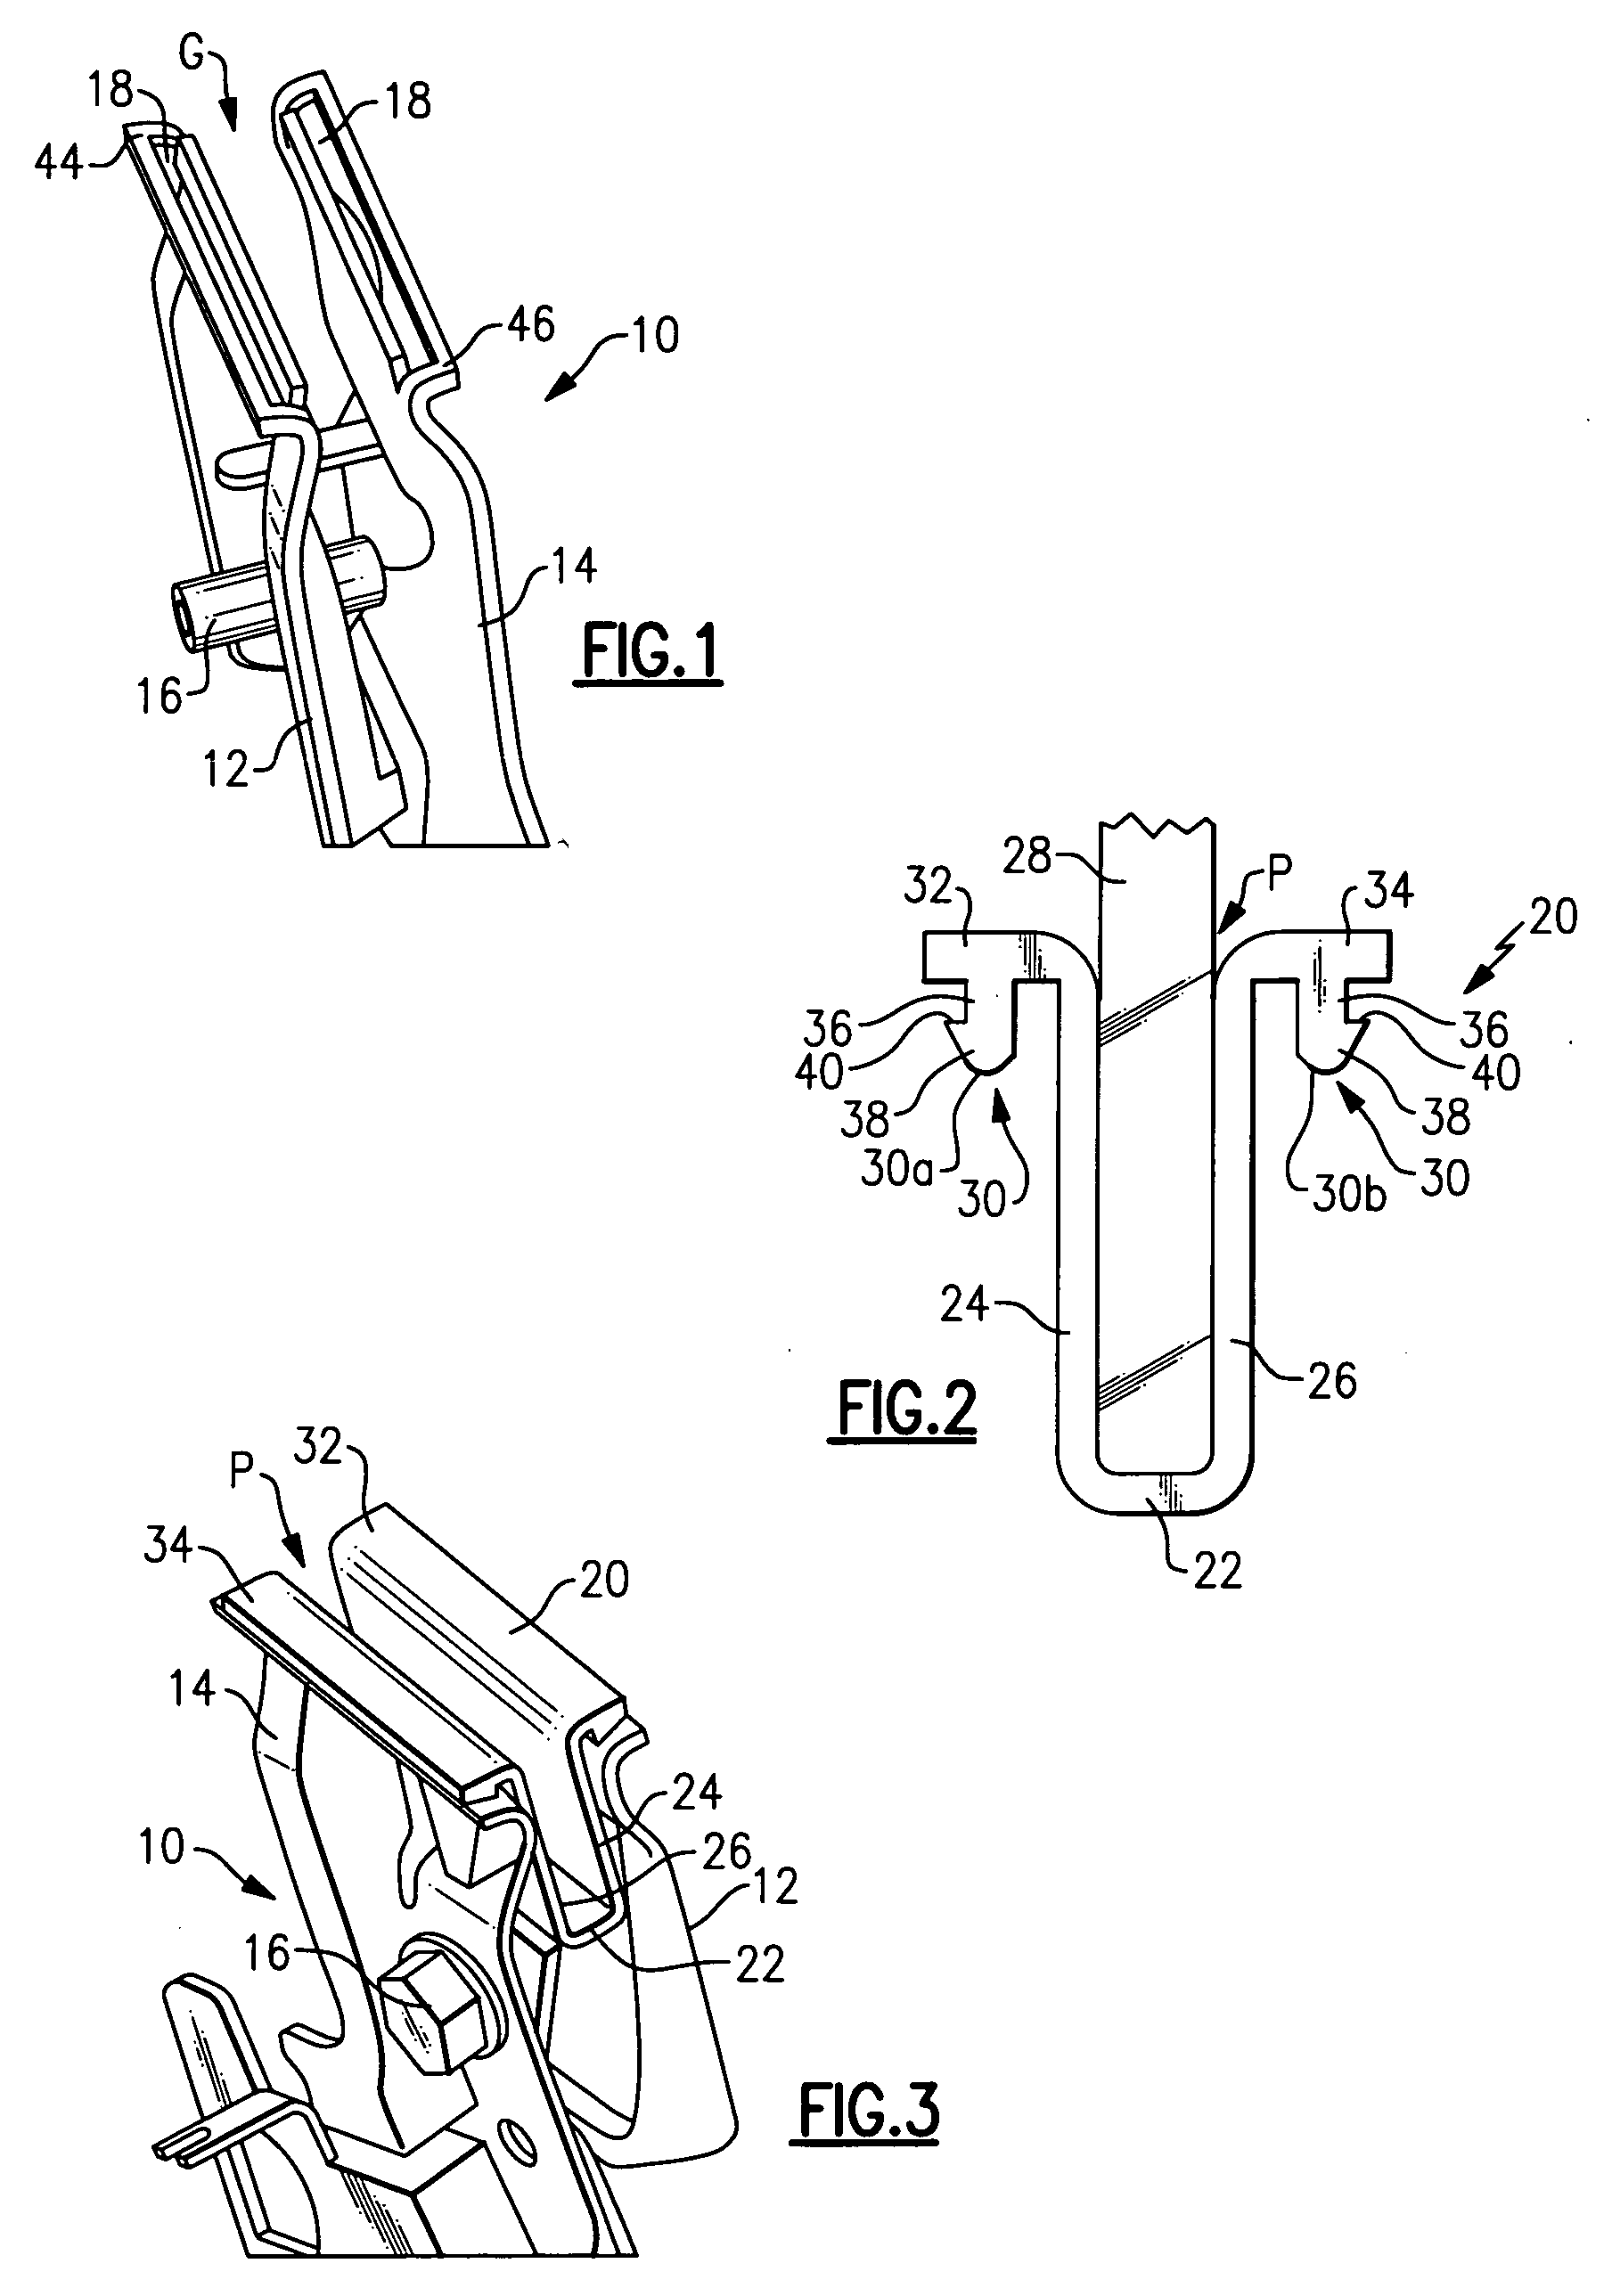 Seal and window clamp assembly